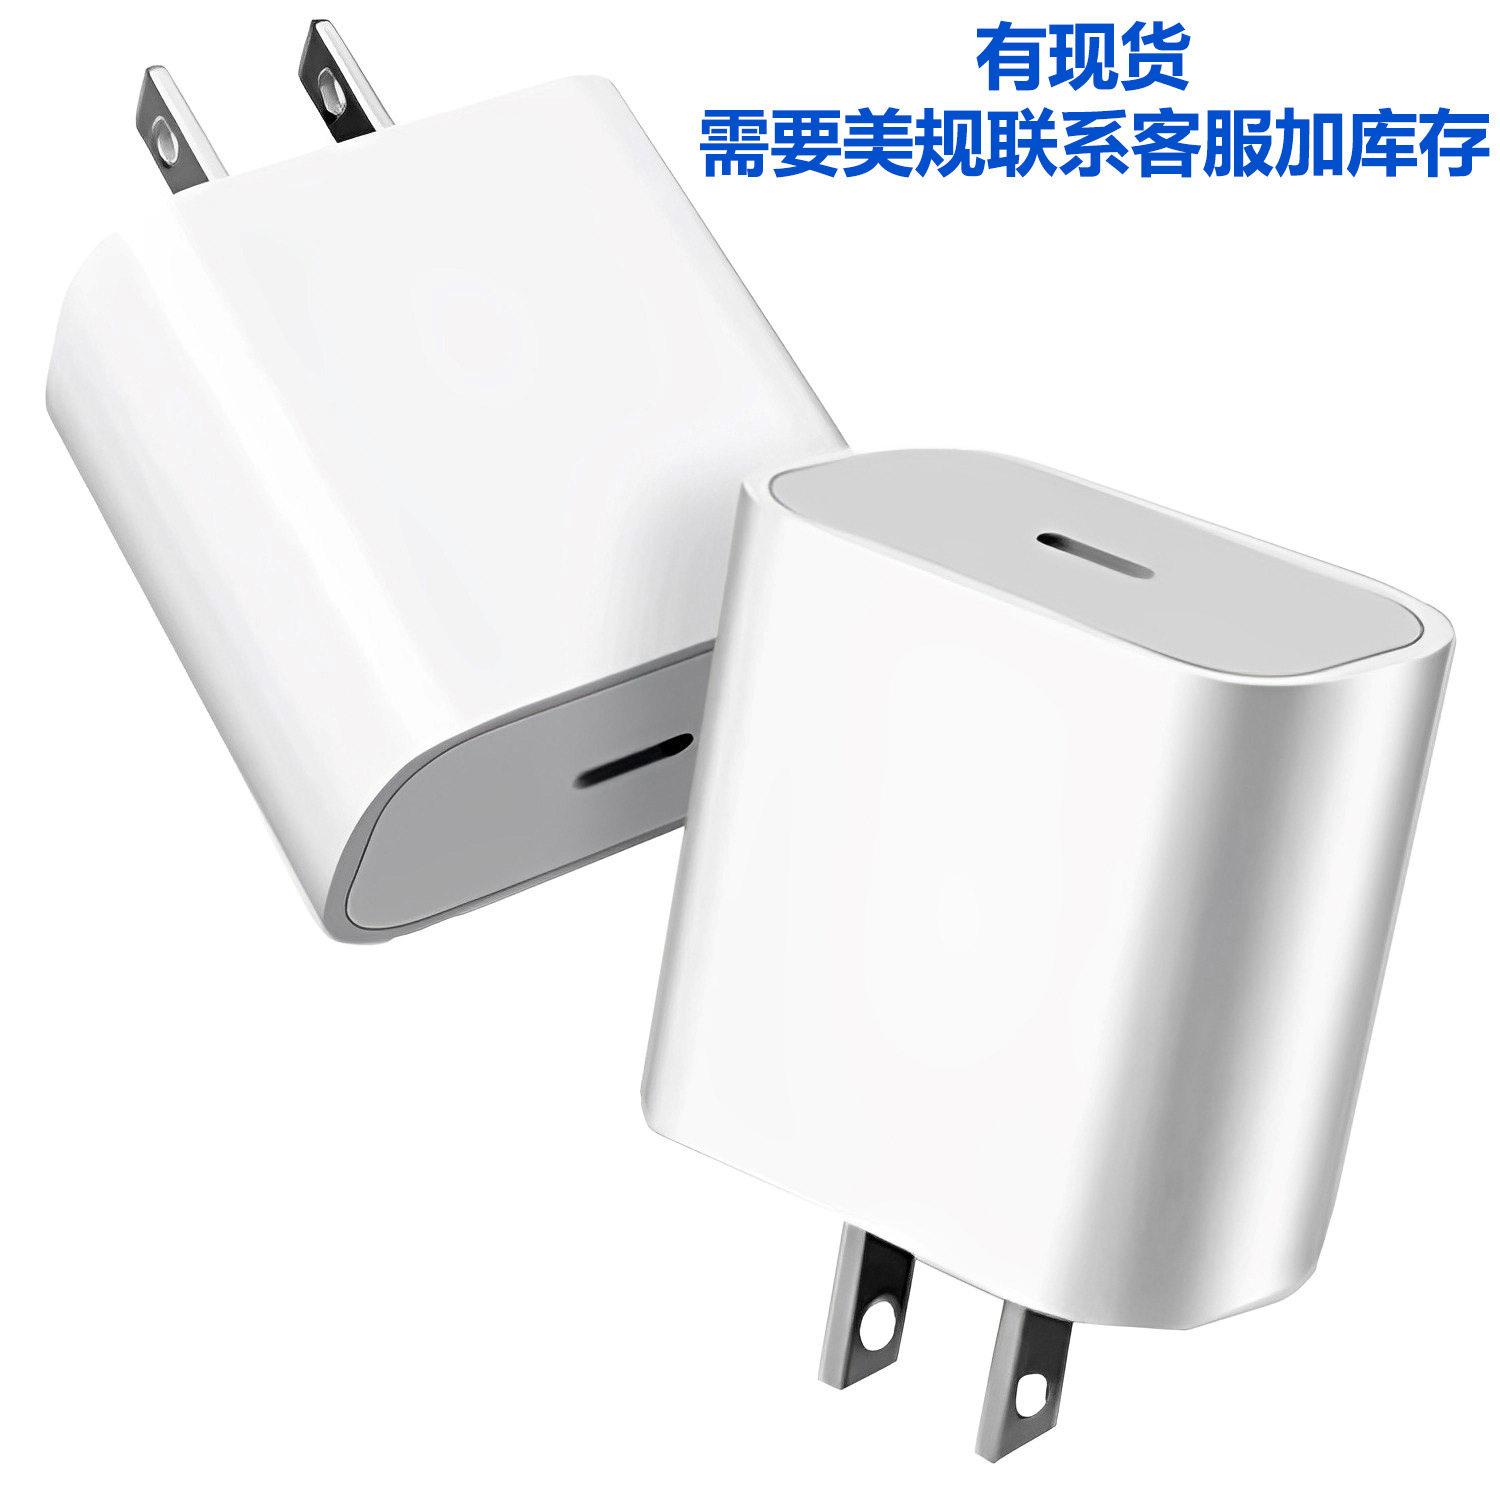 Suitable for Apple Pd20w Fast Charging Charger Head Data Cable 3c Set Tablet Iphone14 Mobile Phone Charging Cable